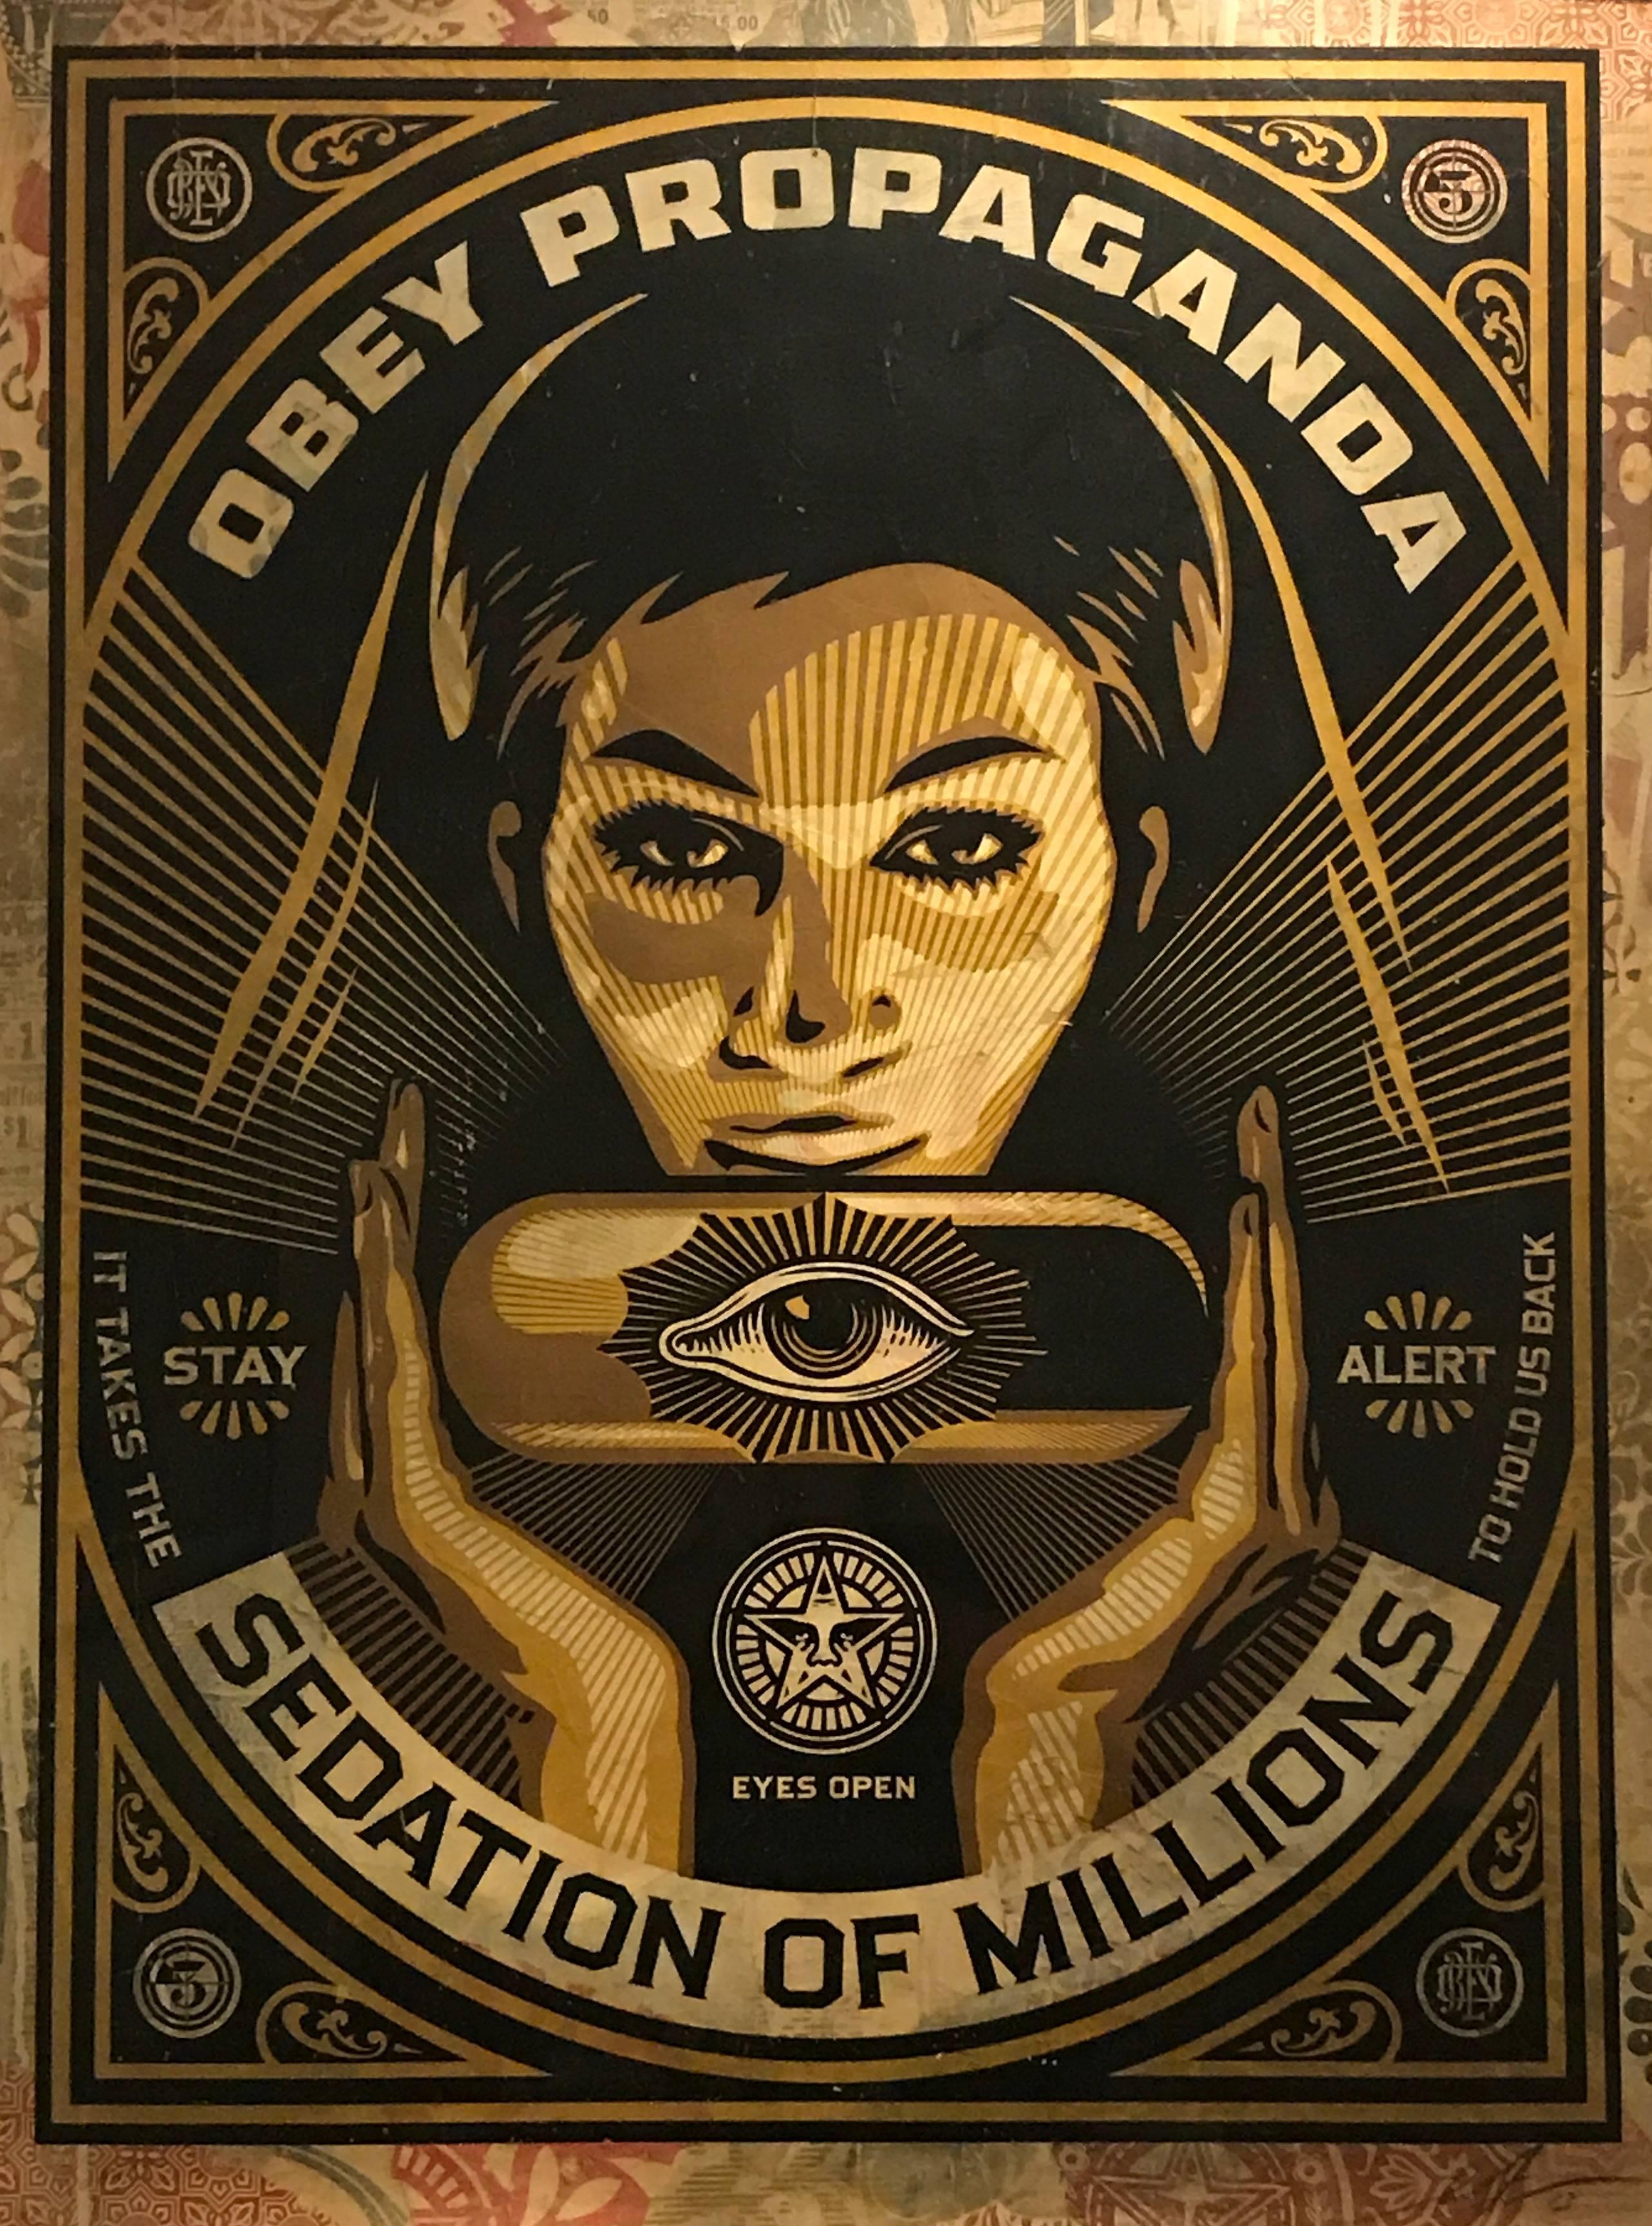 TECHNICAL INFORMATION:

Shepard Fairey
Sedation Pill HPM
2013
HPM (hand-painted multiple), screenprint and mixed media collage on paper
Edition of 10
Pencil signed and numbered

Accompanied with COA by Gregg Shienbaum Fine Art 

Condition: This work